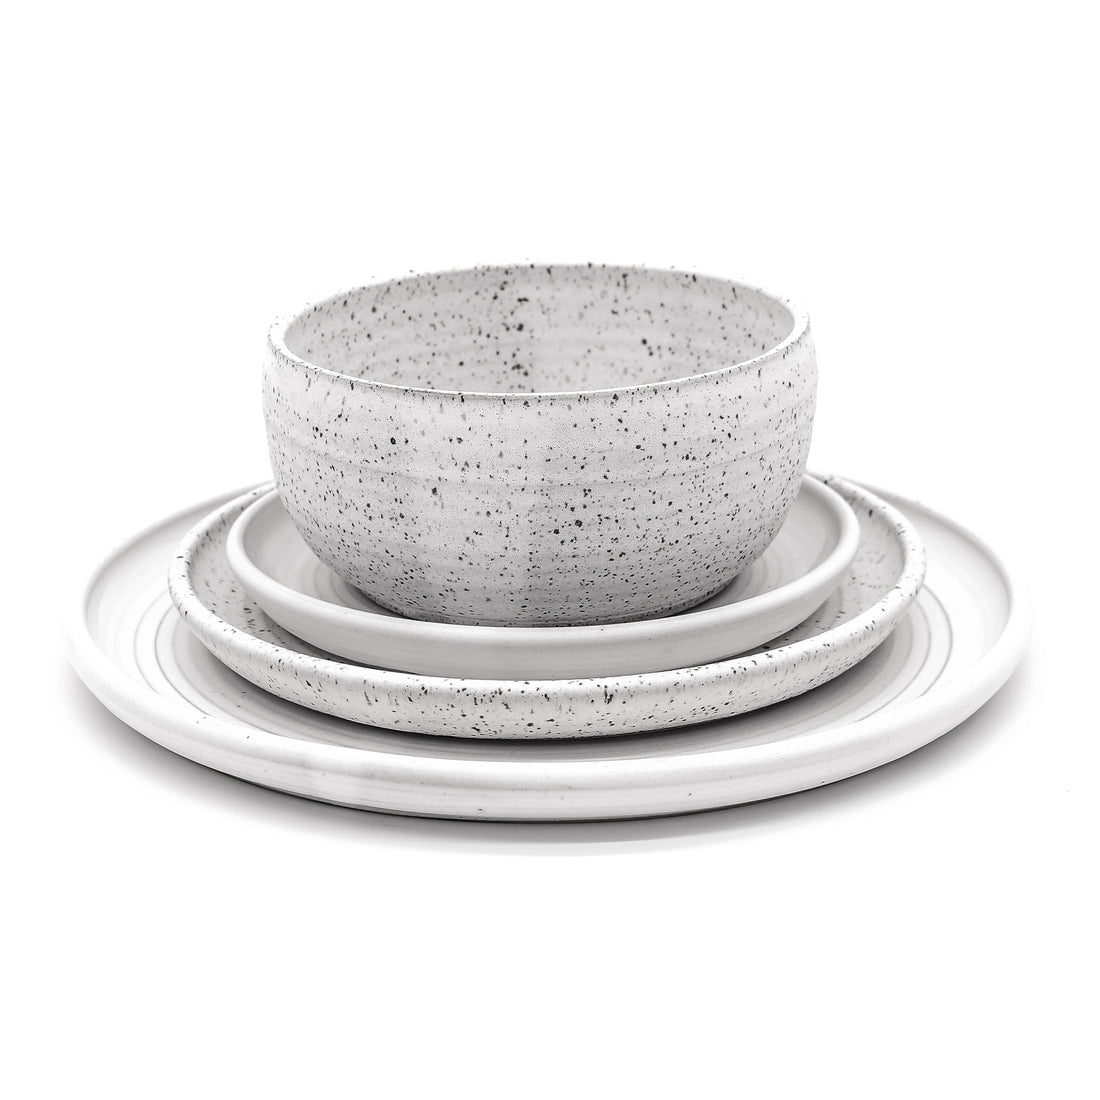 Moonstone | Full Place Setting (4-Piece)